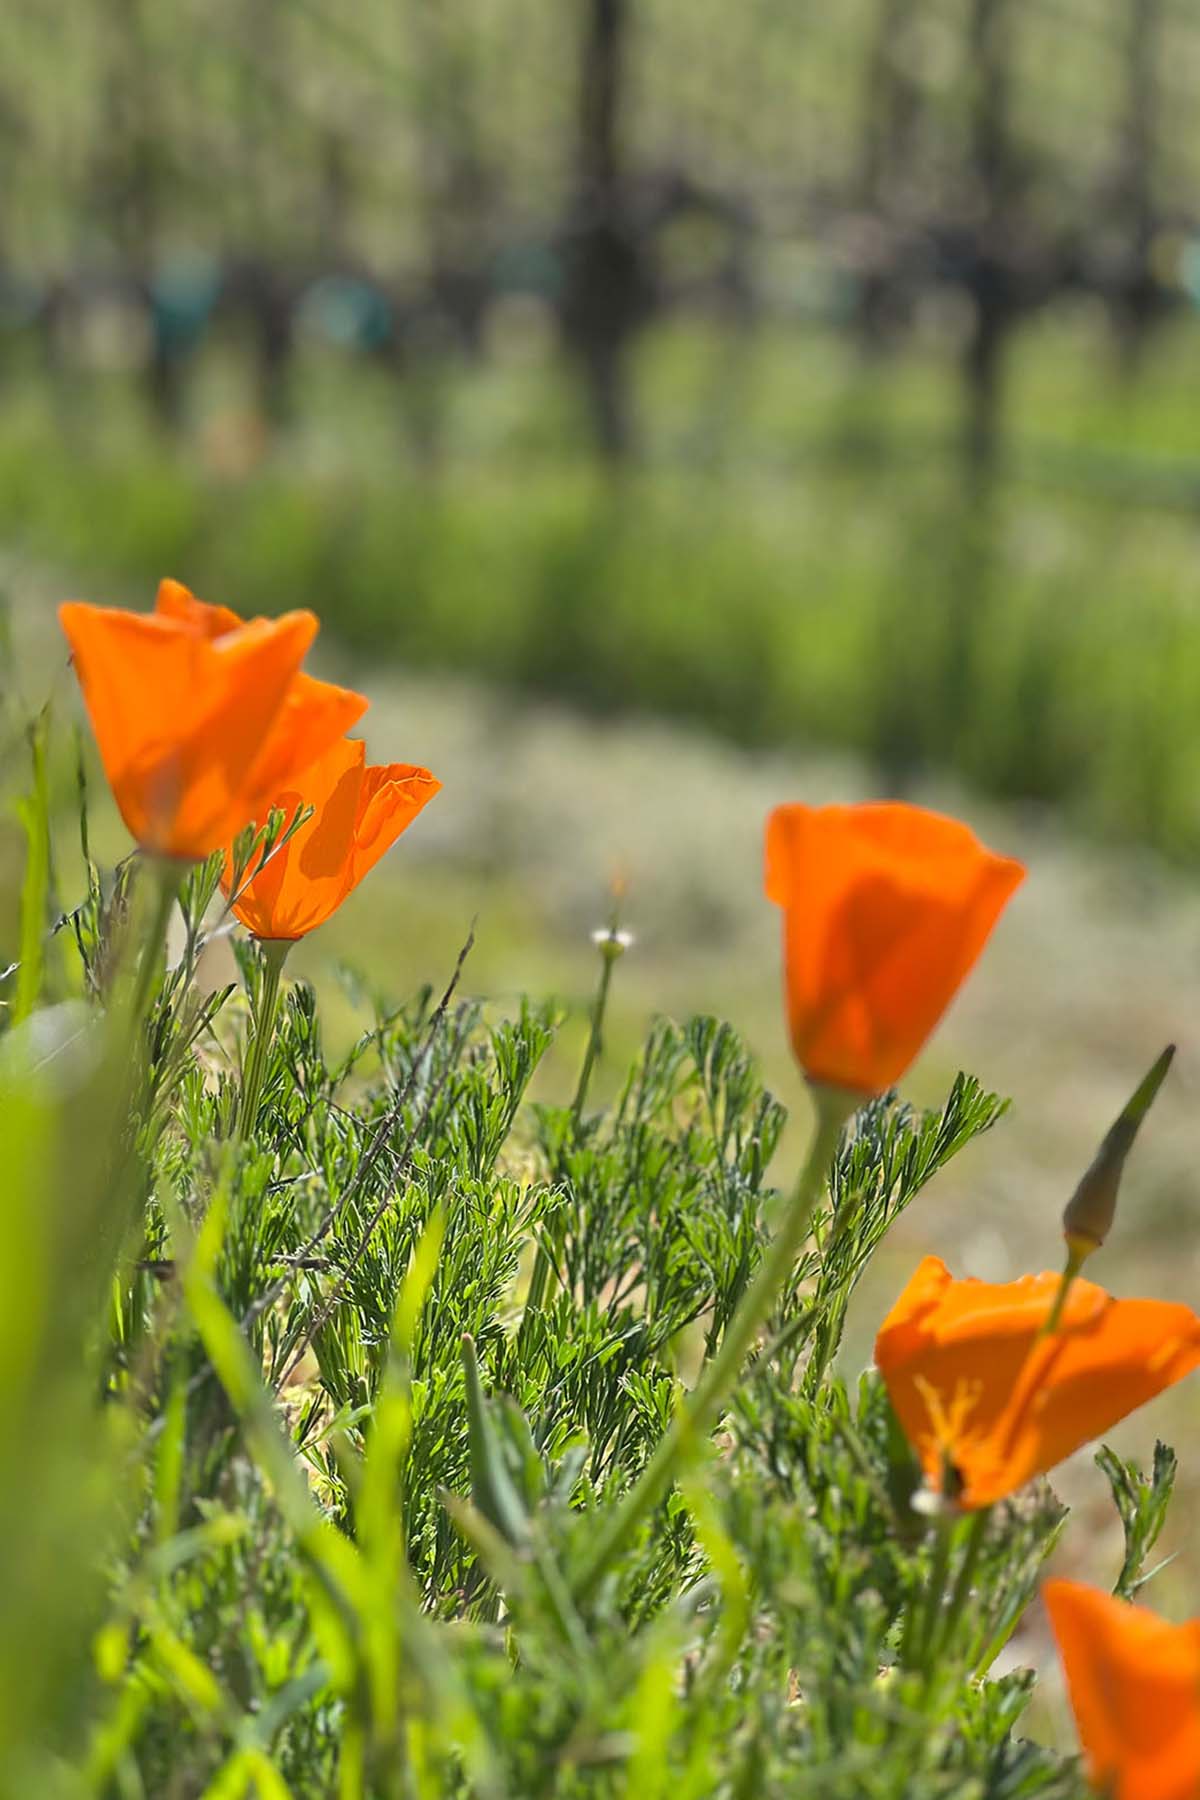 A close up photo of wild orange California poppies growing in green foliage